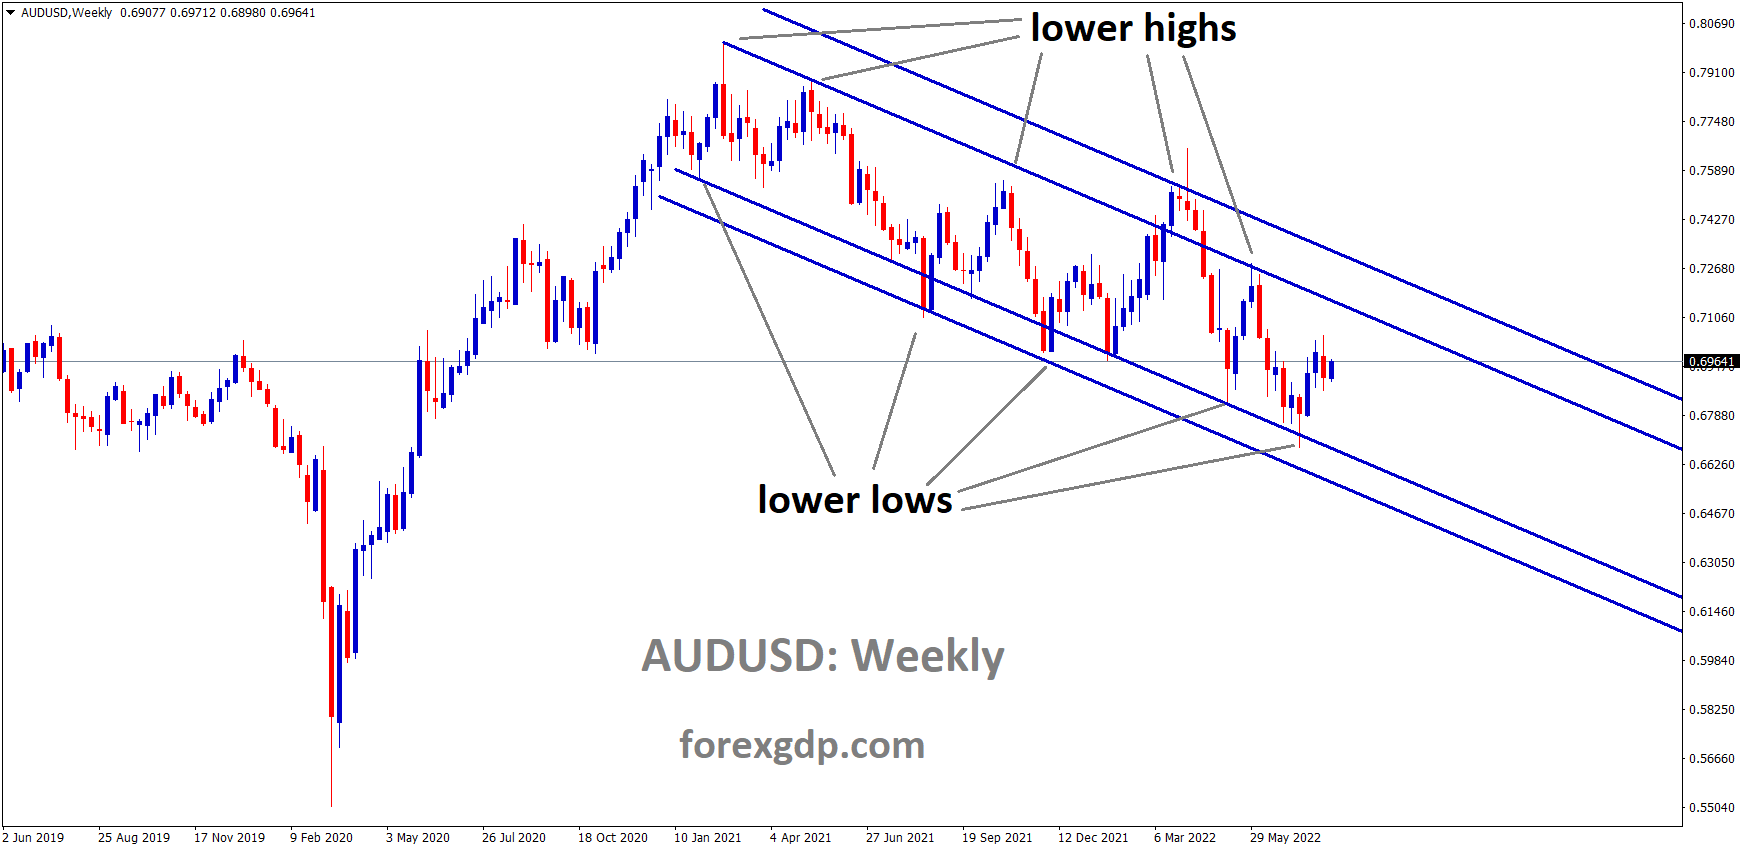 AUDUSD Weekly TF analysis Market is moving in the Descending channel and the Market has rebounded from the Lower low area of the channel 2